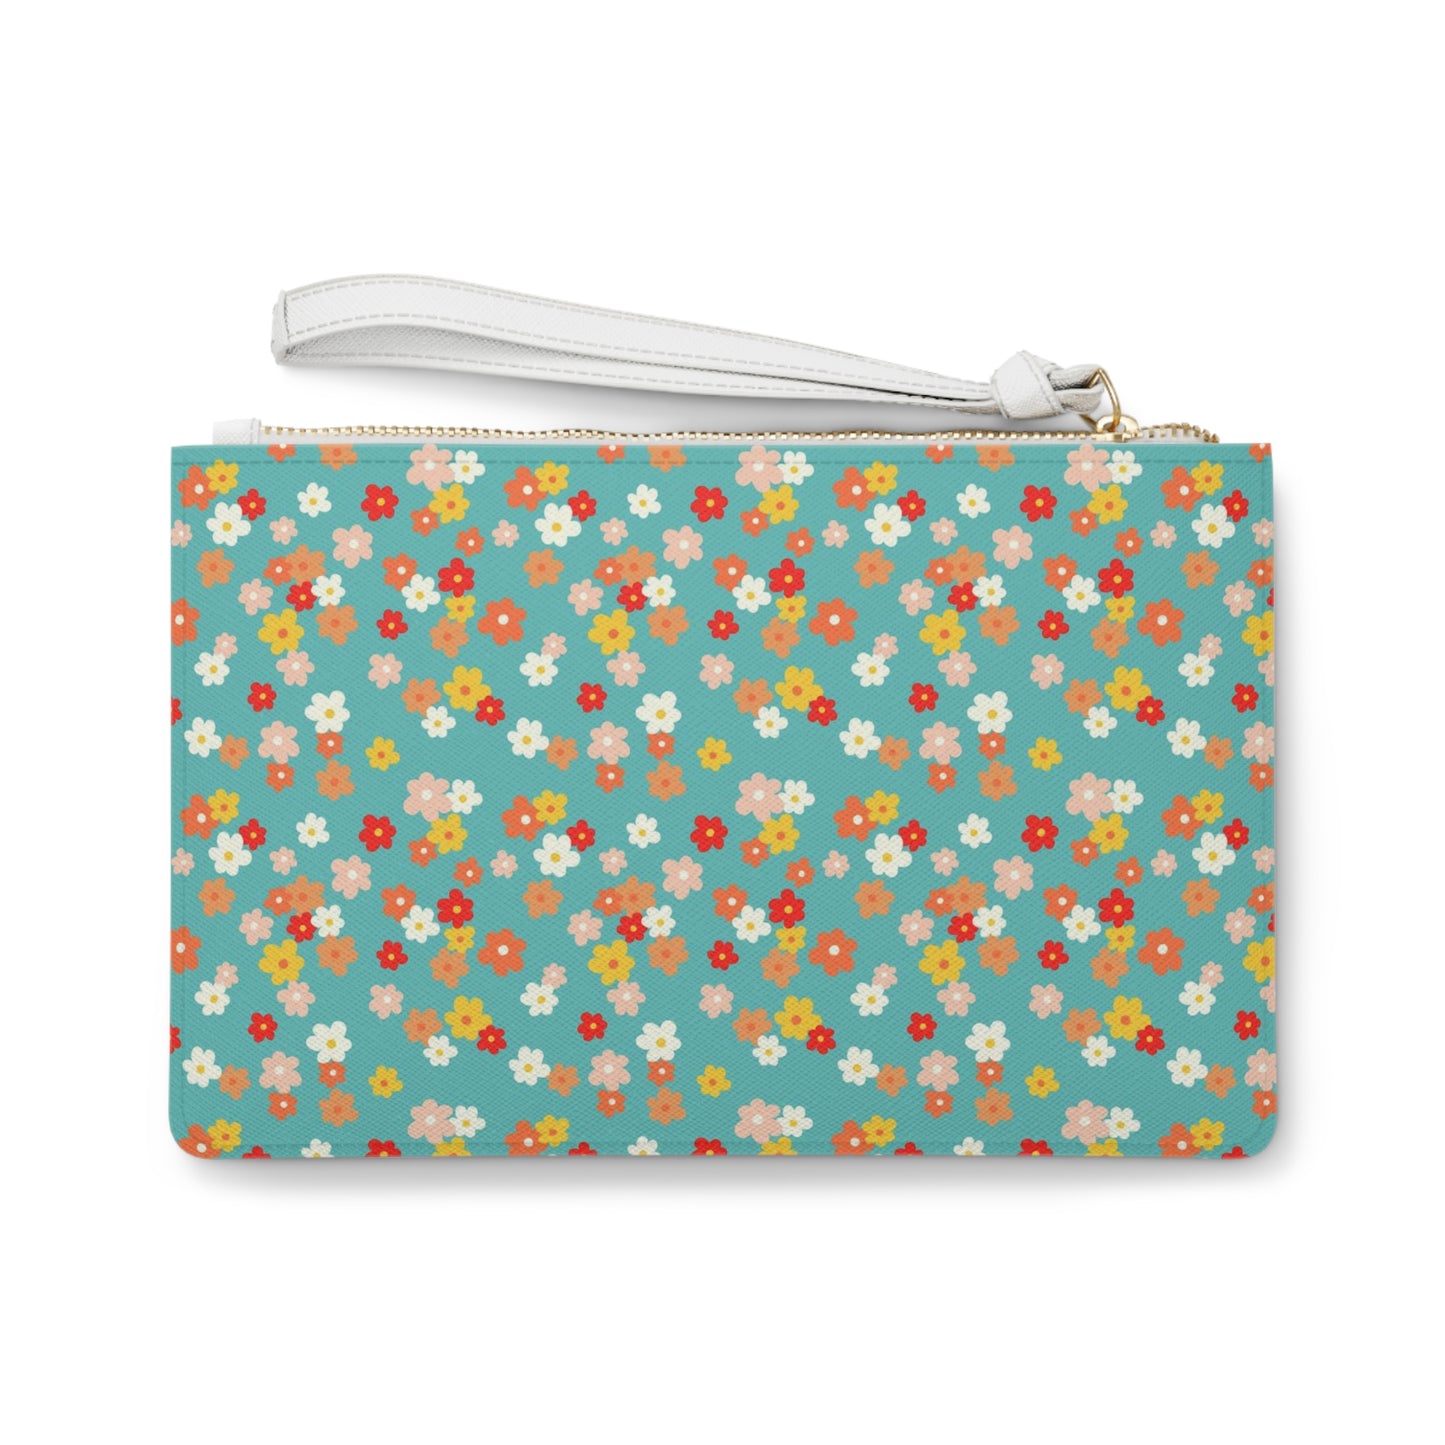 Ditzy Daisy on Turquoise Clutch Bag